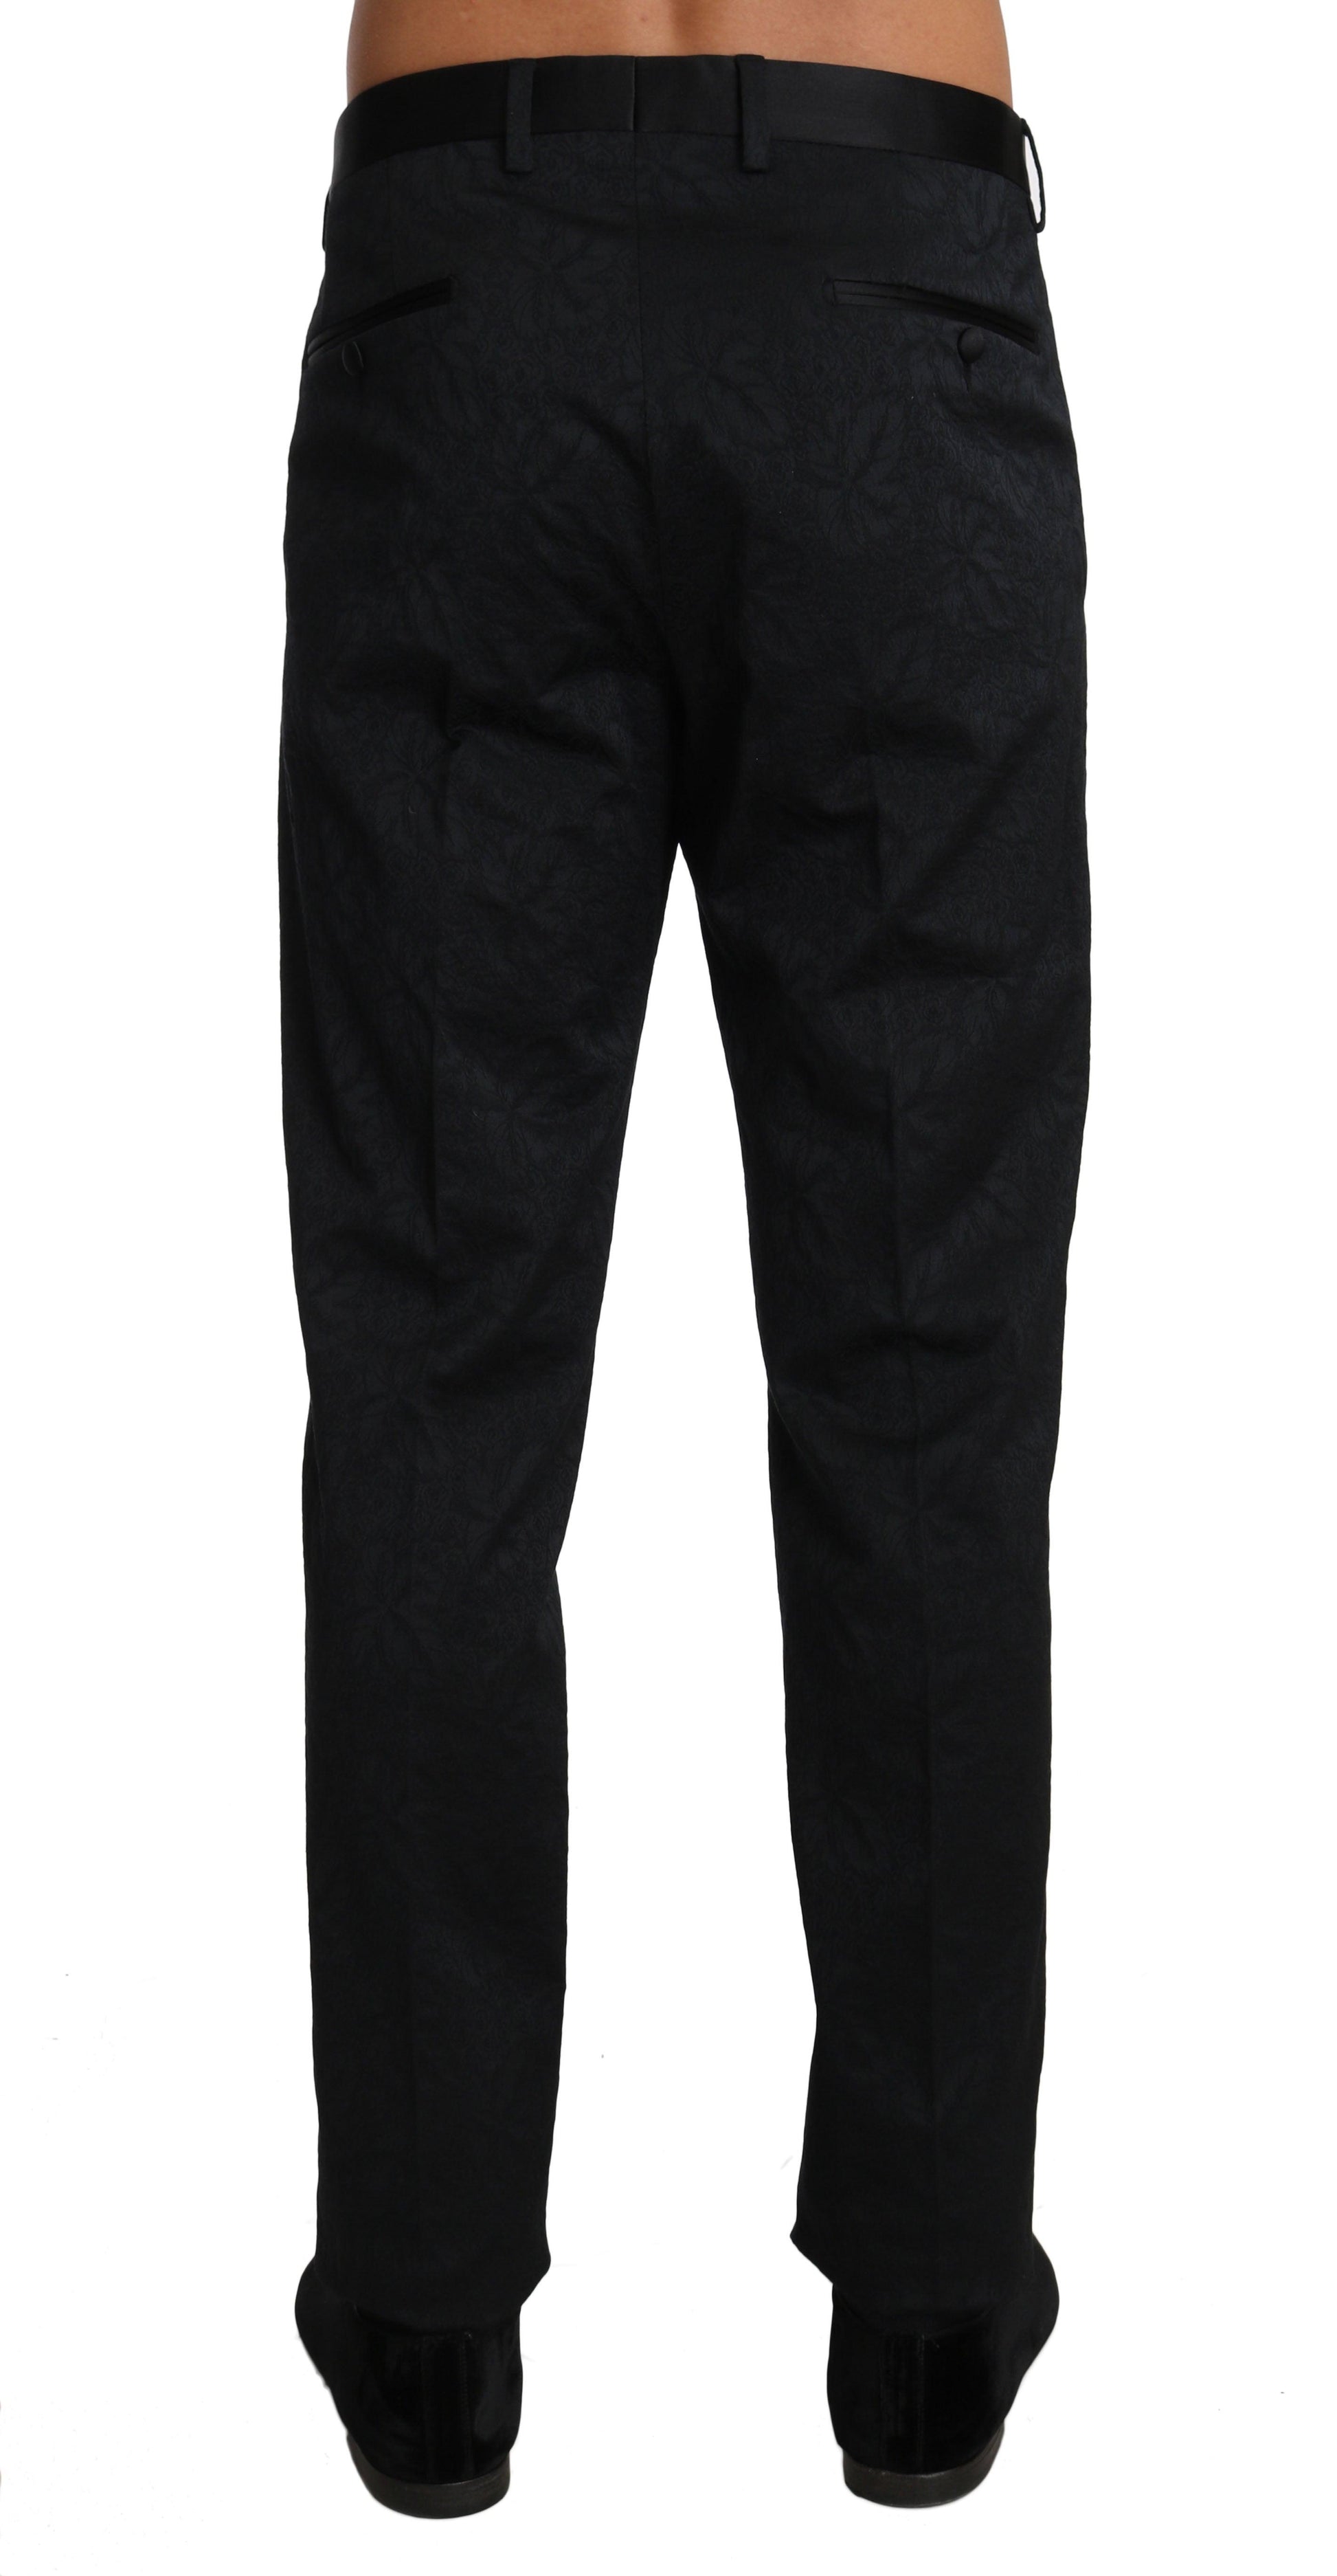 Black Cotton Brocade Formal Trousers Pants - Designed by Dolce & Gabbana Available to Buy at a Discounted Price on Moon Behind The Hill Online Designer Discount Store